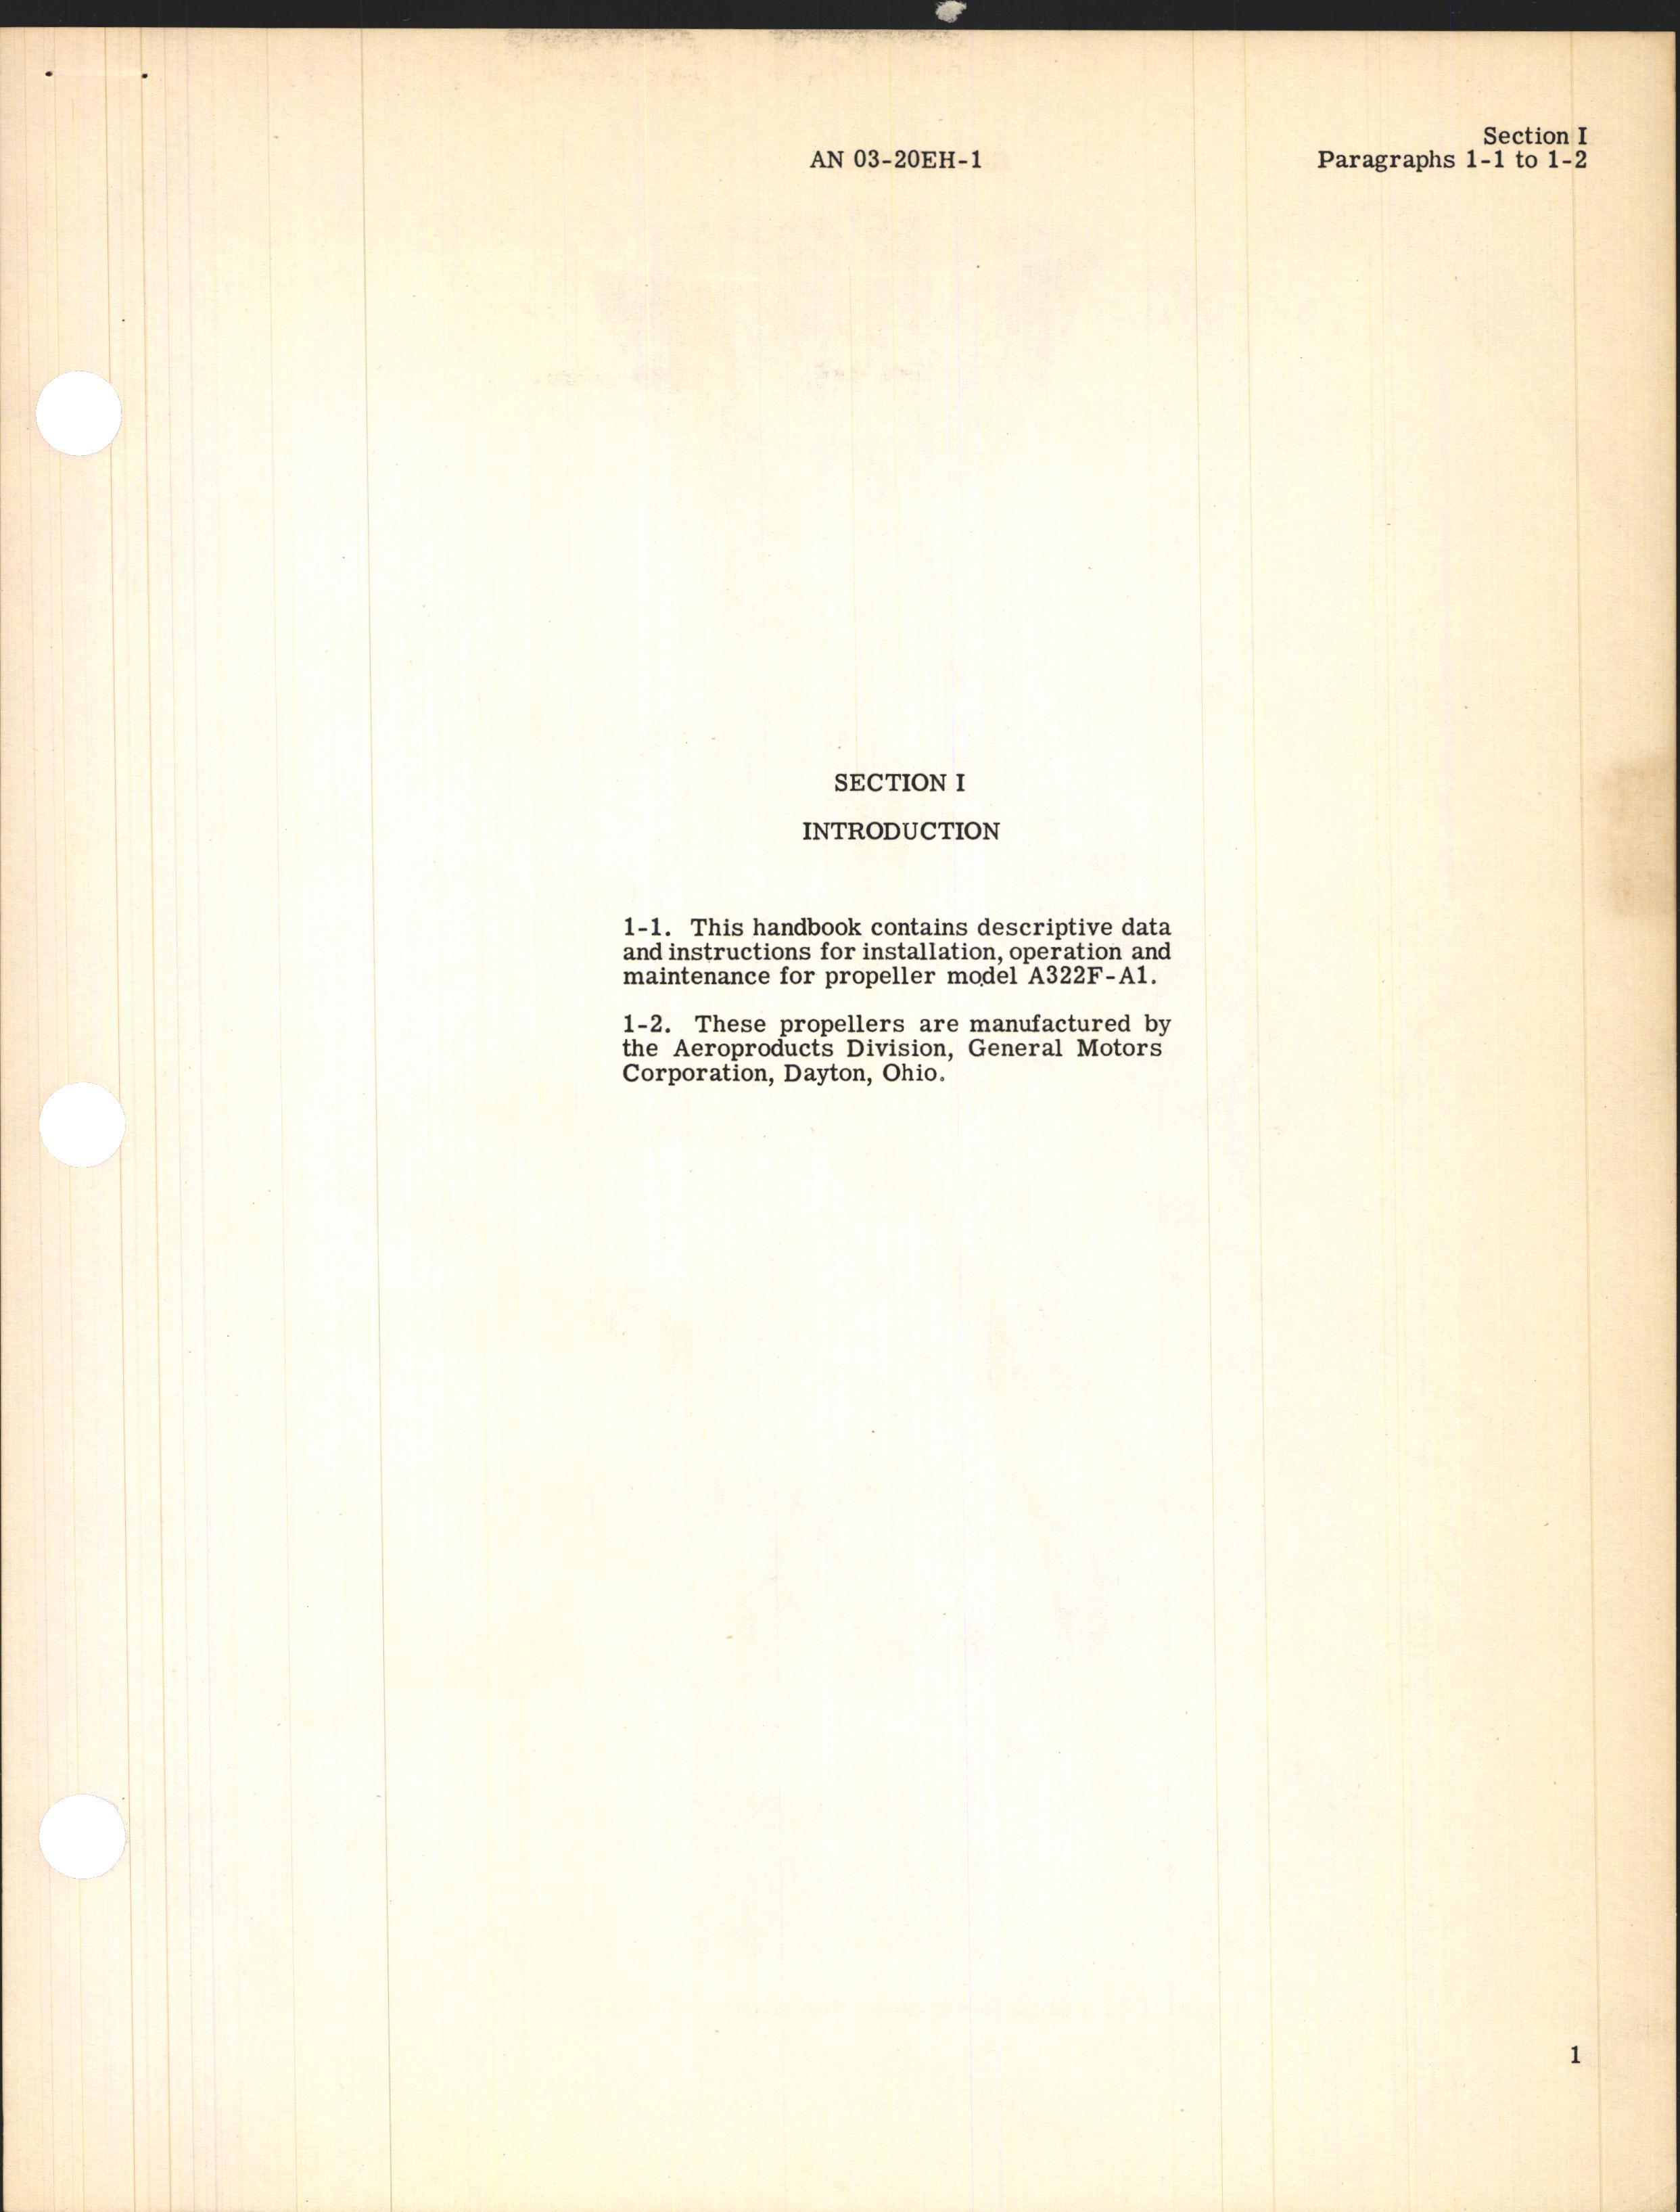 Sample page 5 from AirCorps Library document: Operation & Service Instructions for Hydraulic Propeller Model A322F-A1